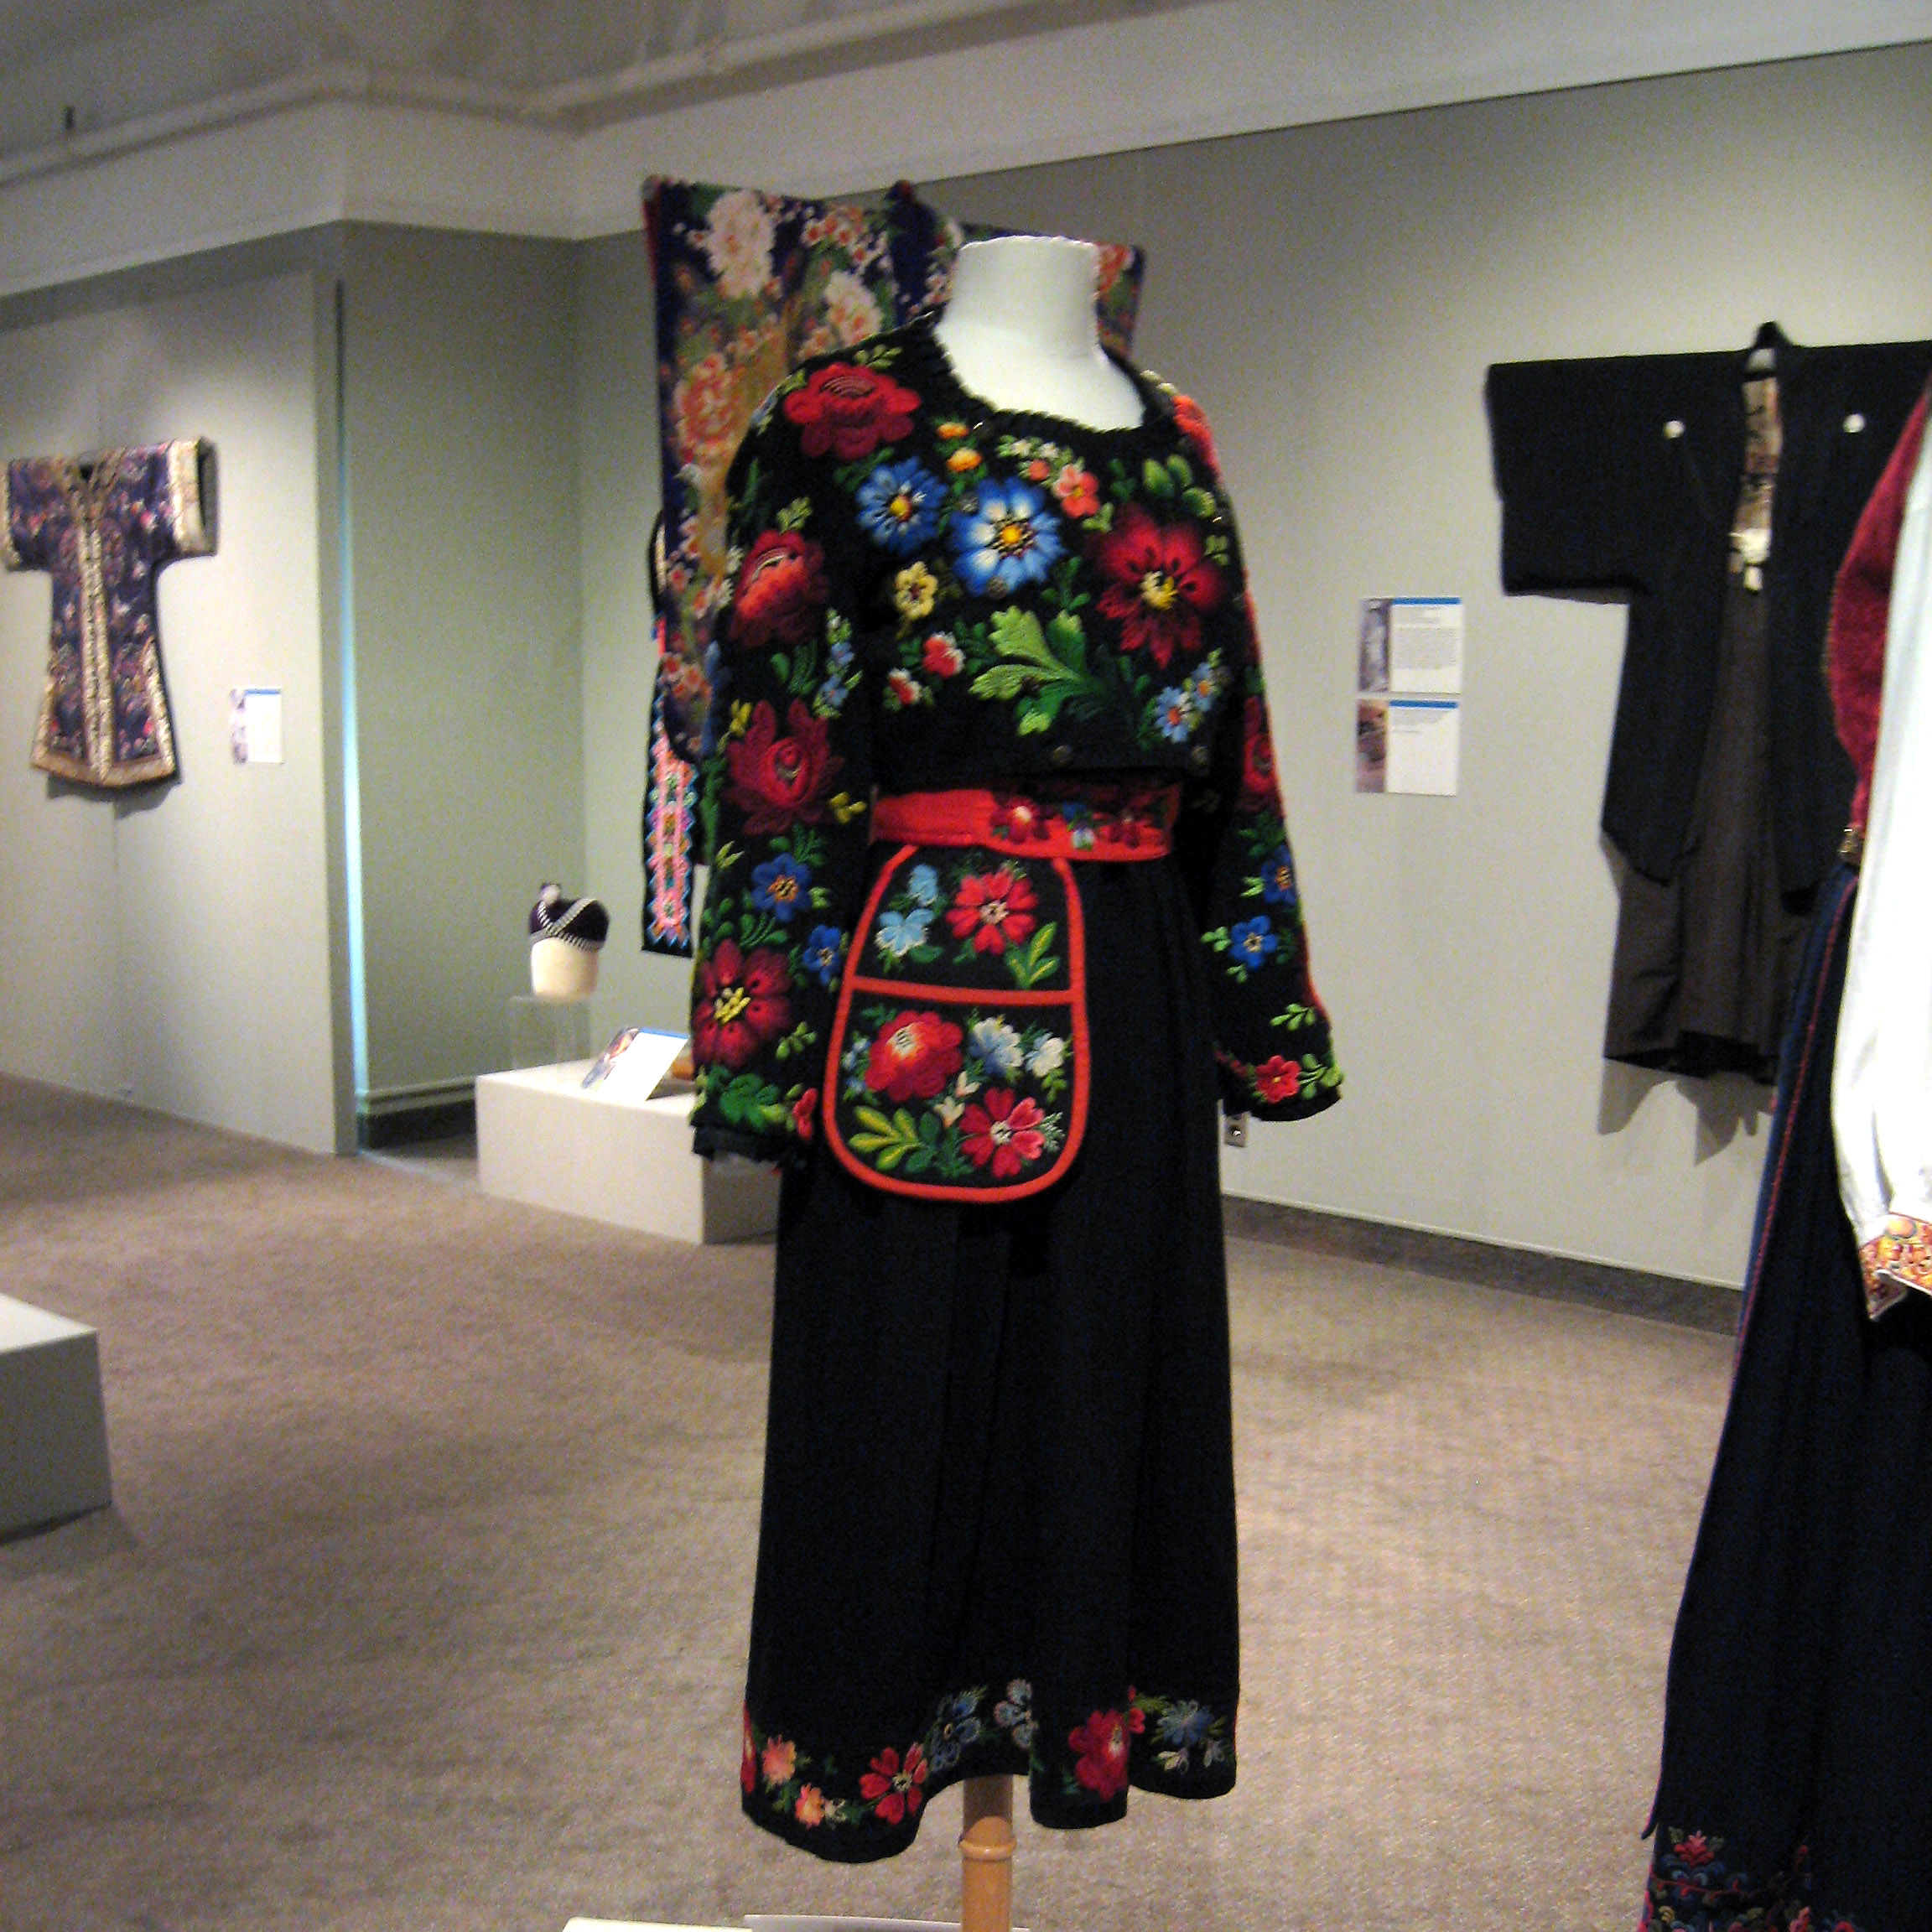 Expressions Of Stability And Change: Ethnic Dress And Folk Costume exhibition with clothing on display